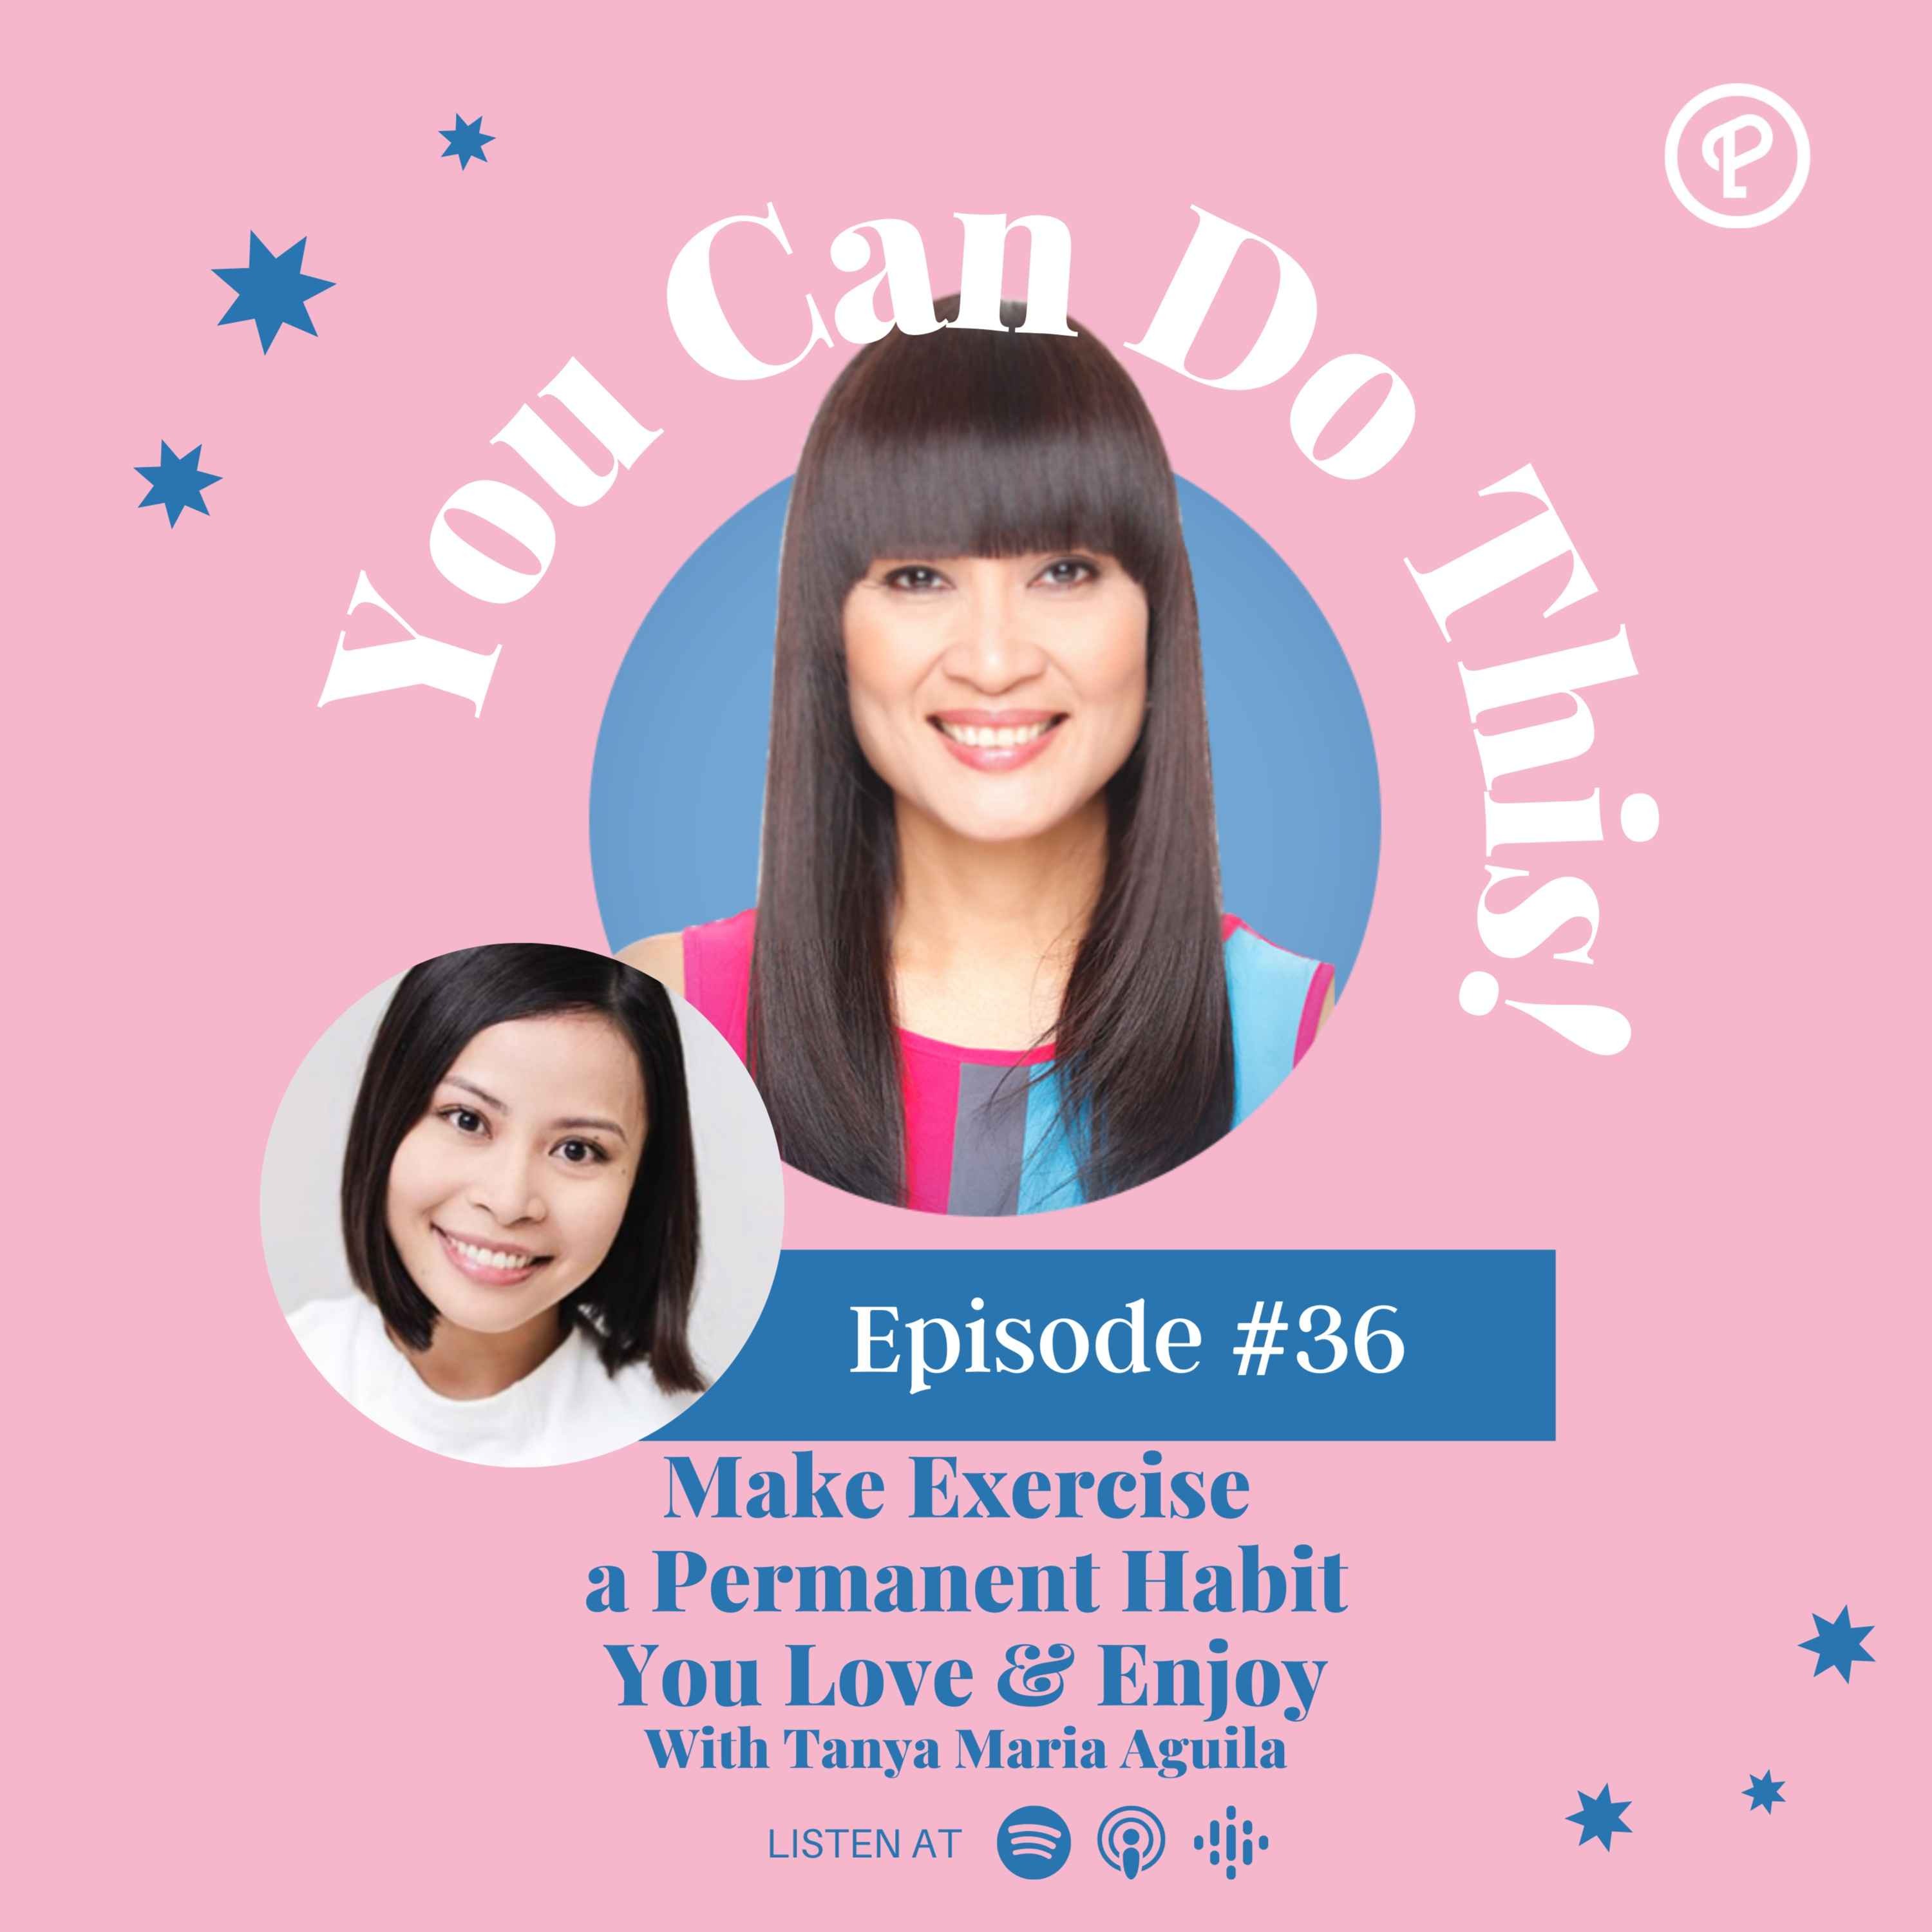 Ep. 36: Make Exercise  a Permanent Habit You Love & Enjoy With Tanya Maria Aguila